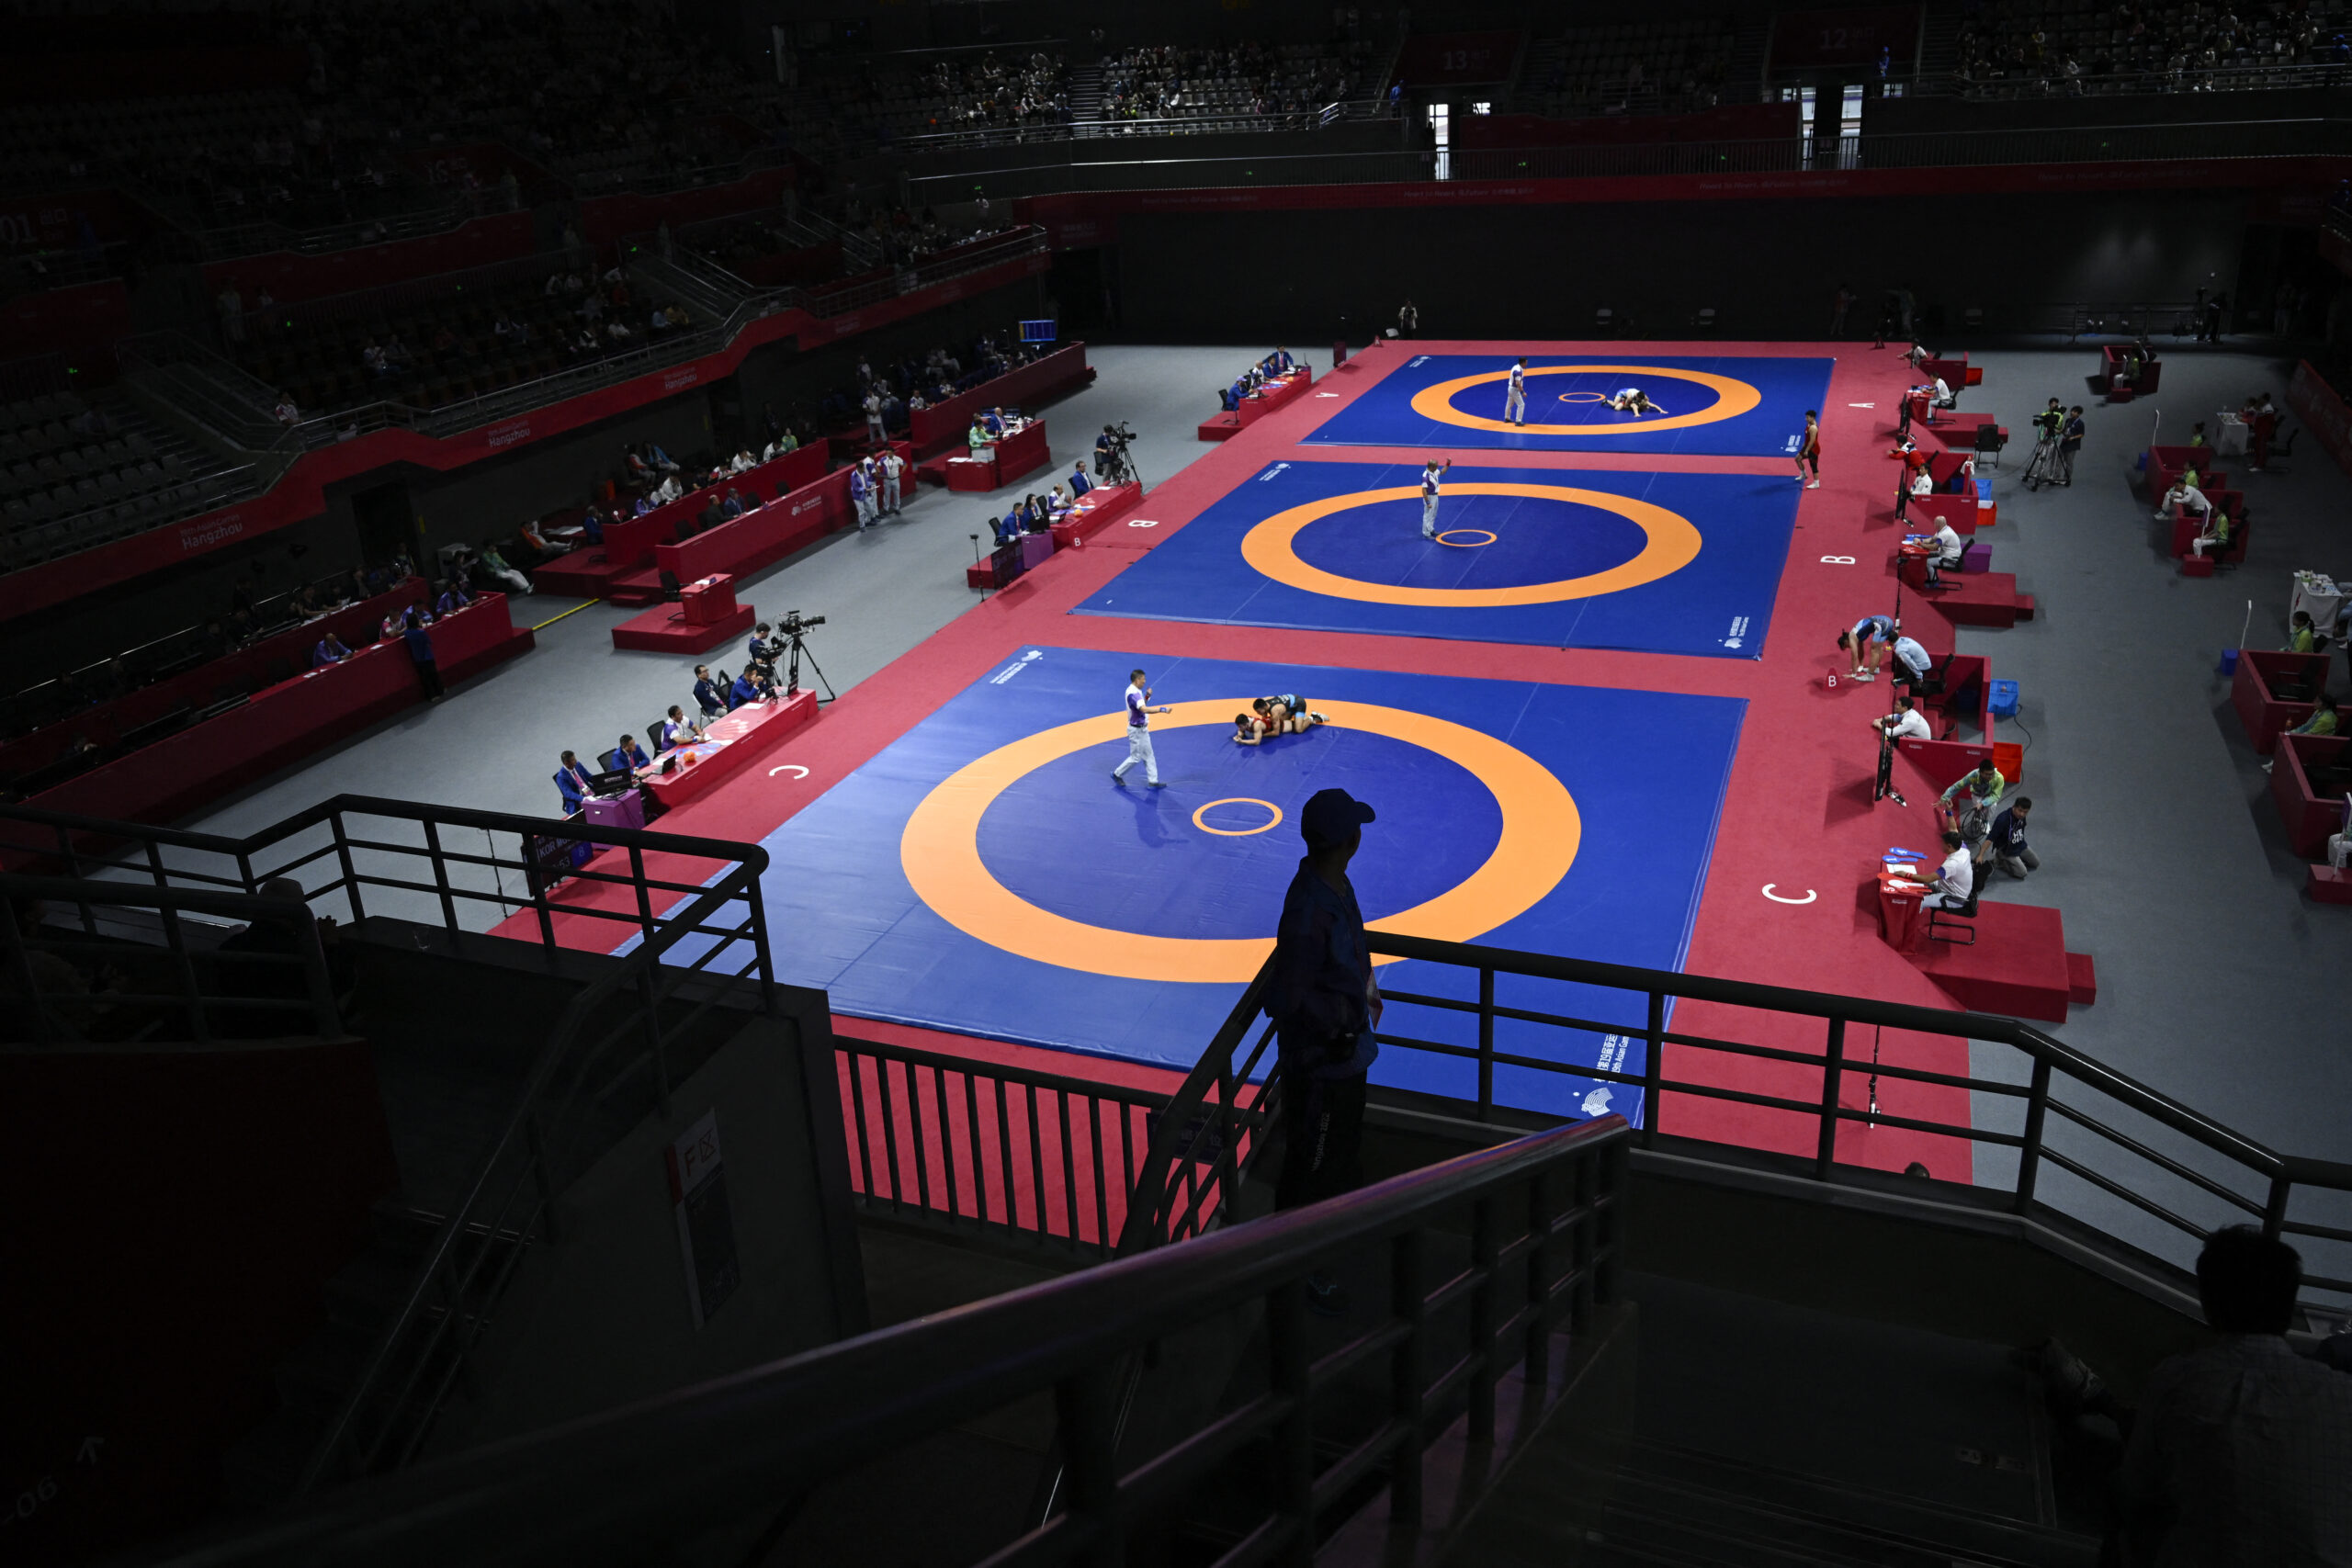 A security official keeps watch during the men’s and women's freestyle wrestling matches during the 2022 Asian Games in Hangzhou in China's eastern Zhejiang province on October 6, 2023.